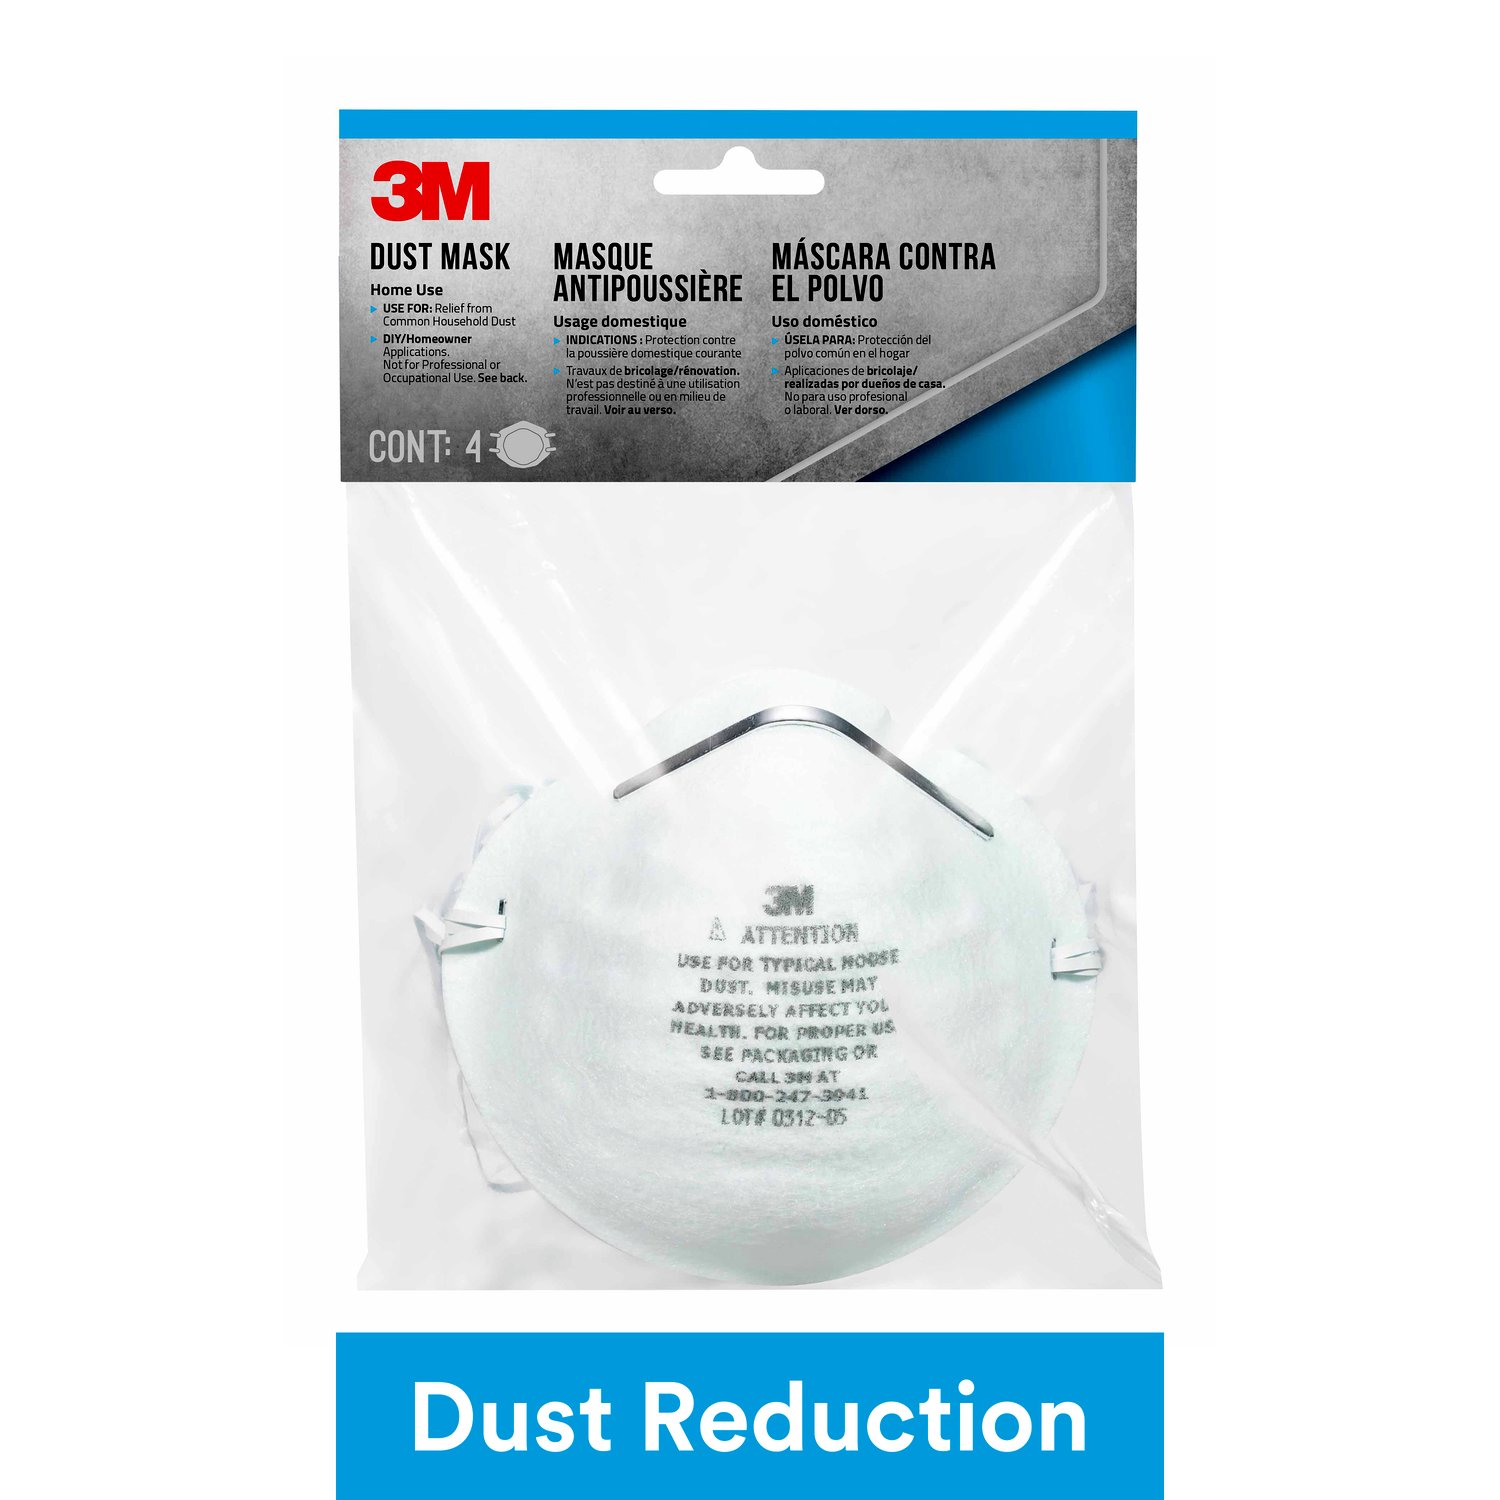 7100159379 - 3M Home Dust Mask, 8661P4-C, 4 eaches/pack, 36 packs/case